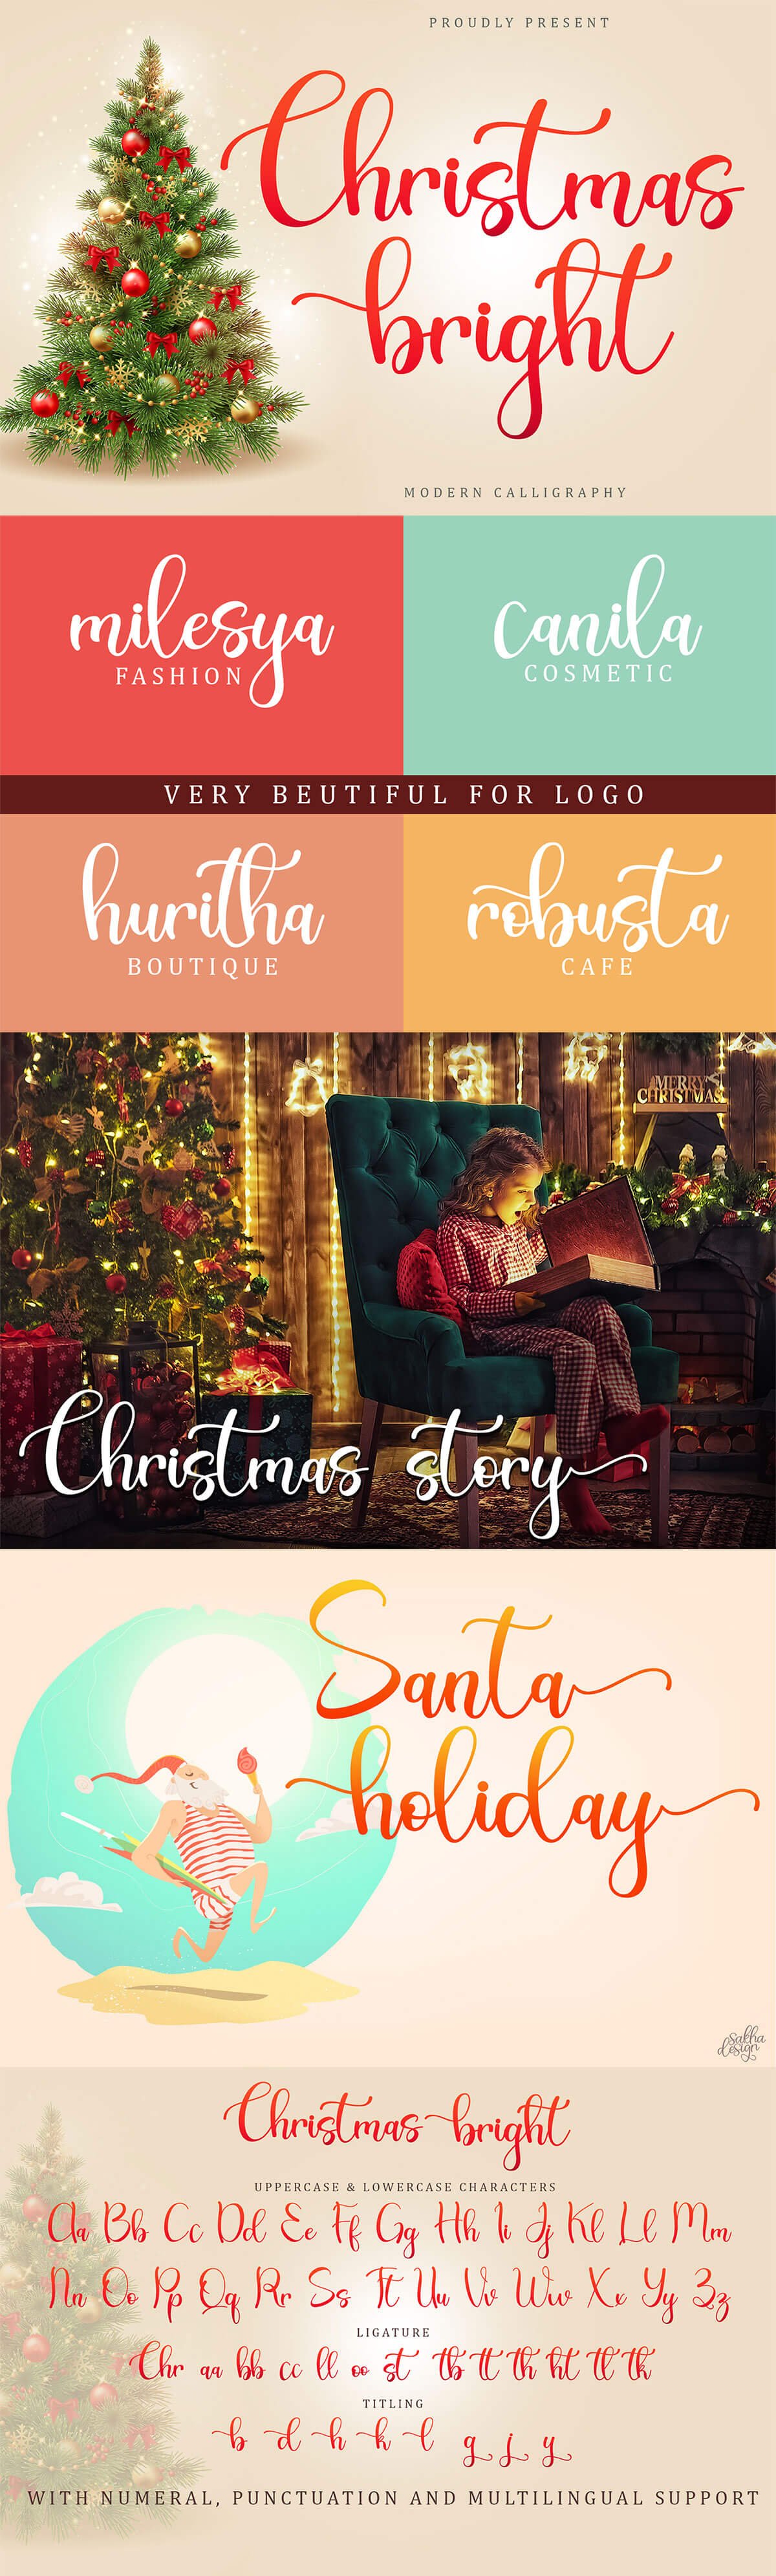 Christmas Bright Calligraphy Font